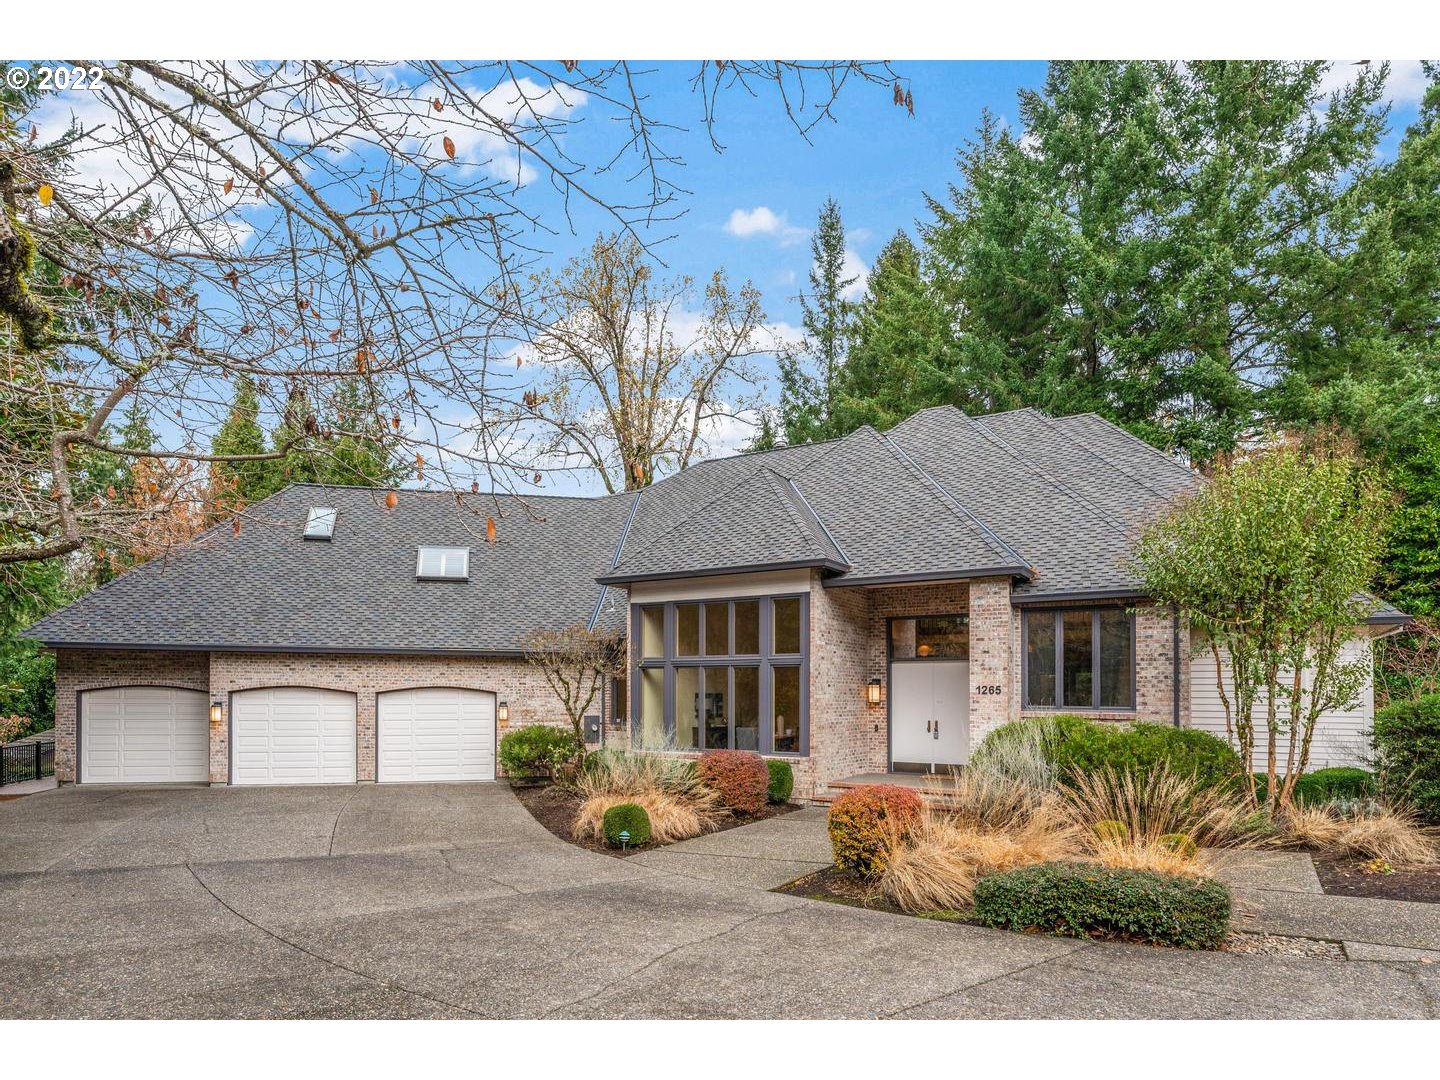 1265 S MILITARY RD, Portland, OR 97219